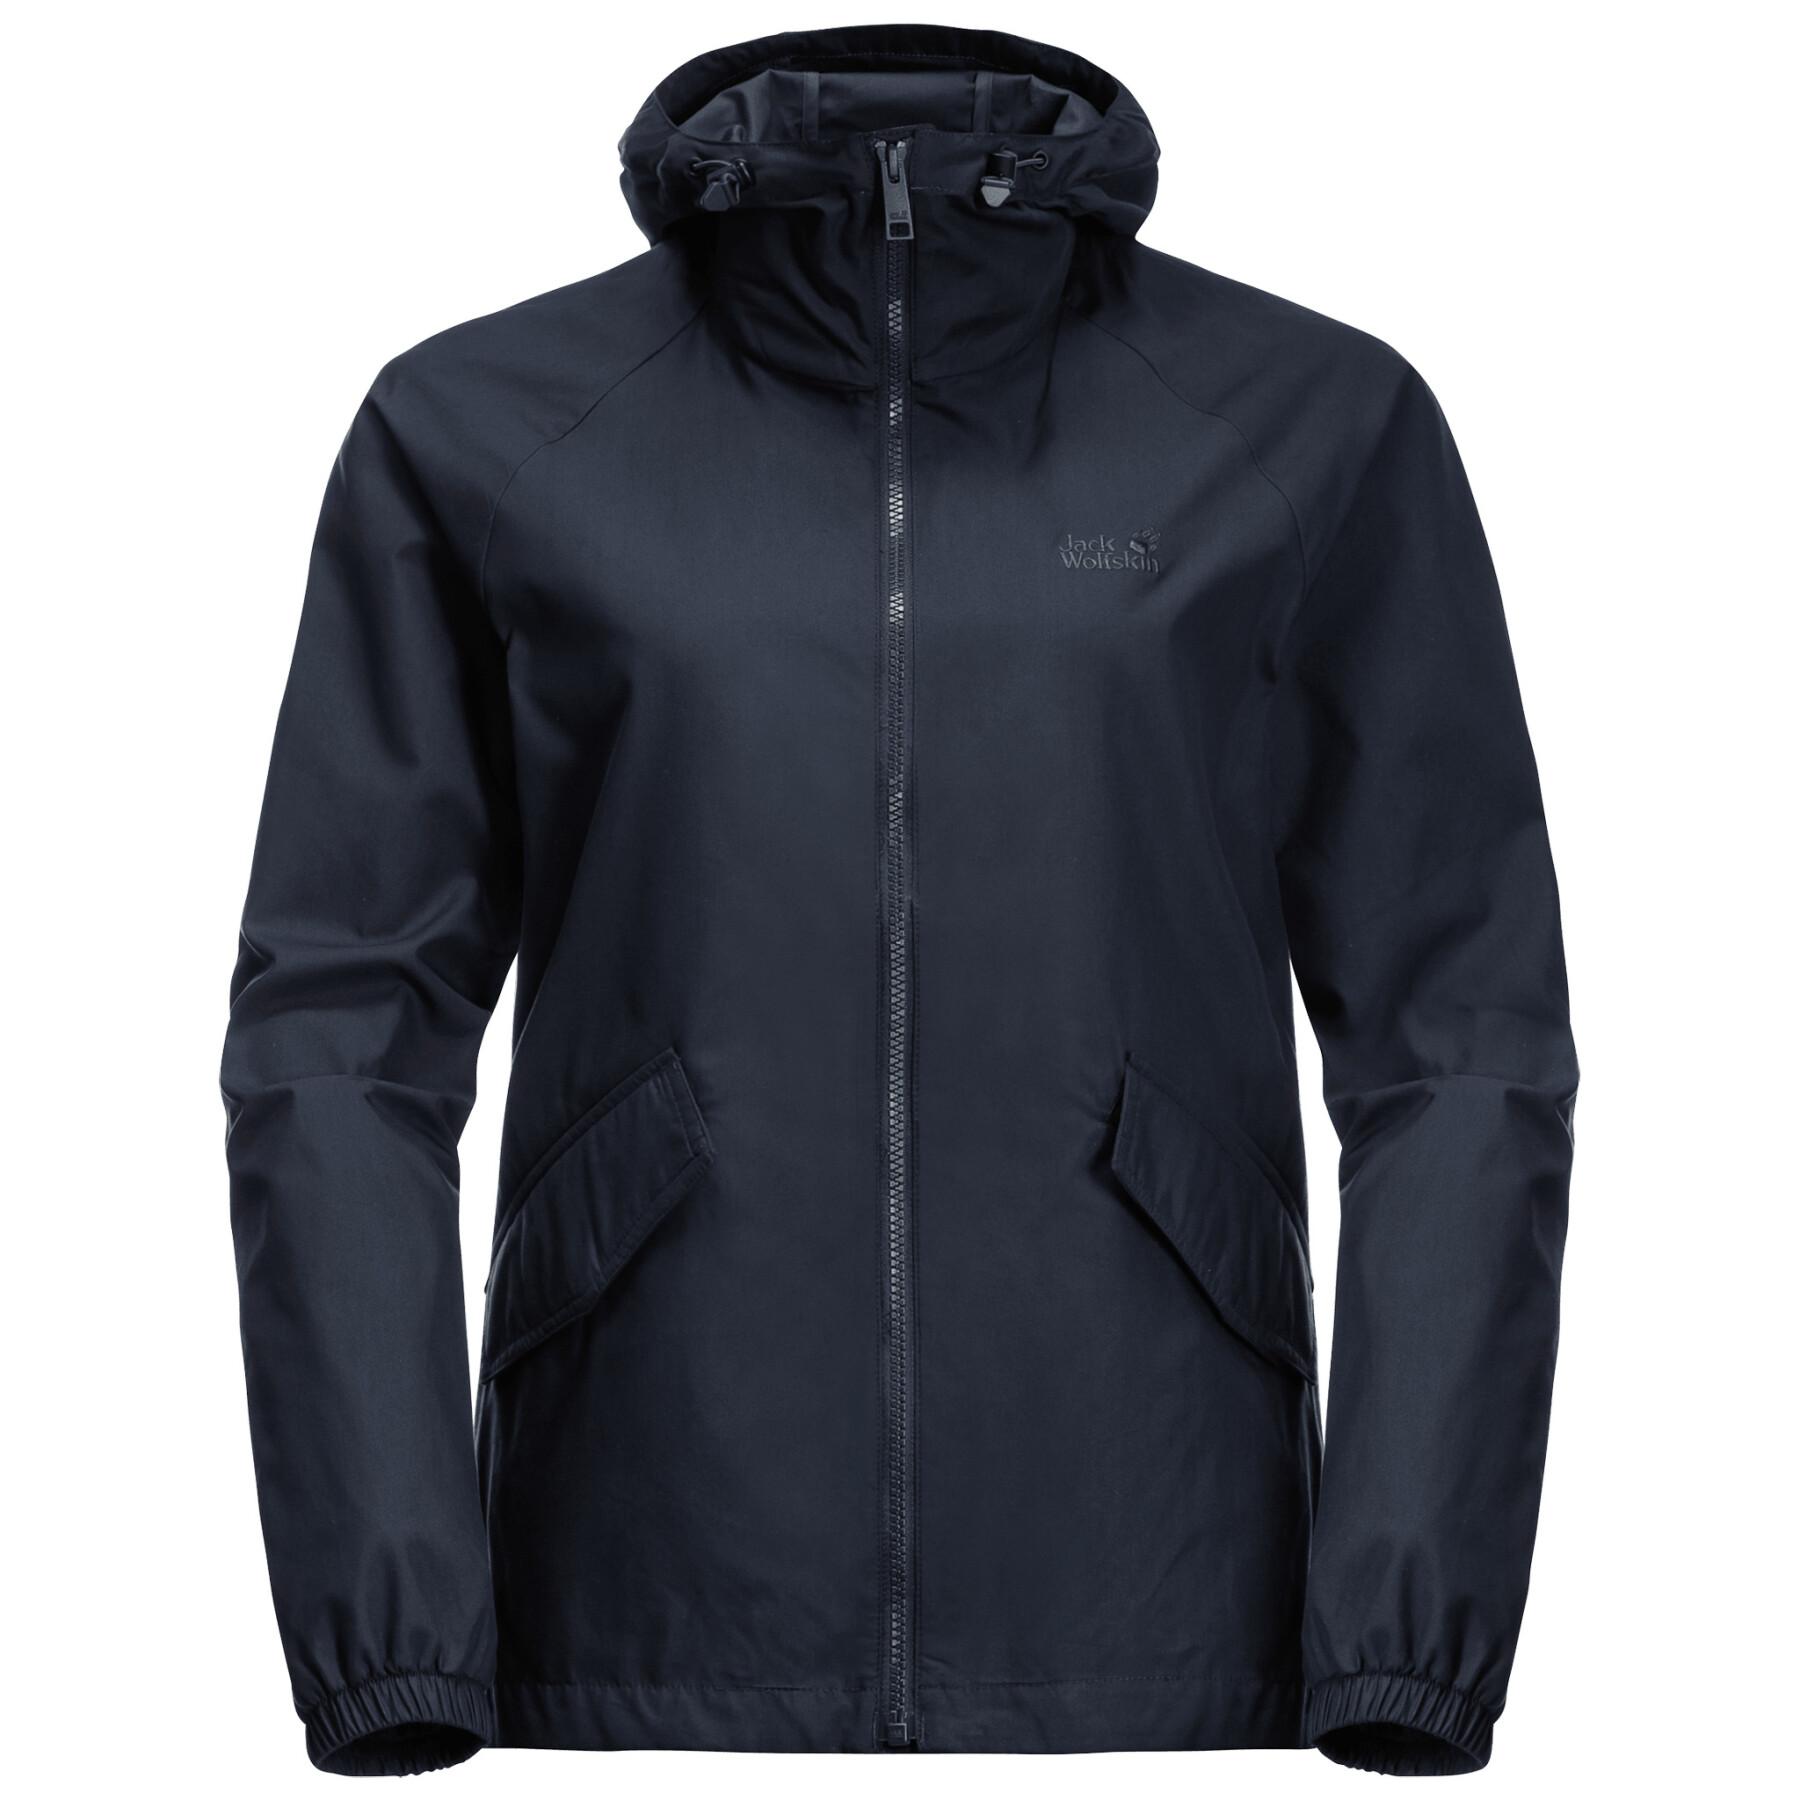 Chaqueta impermeable para mujer Jack Wolfskin Lakeside Trip